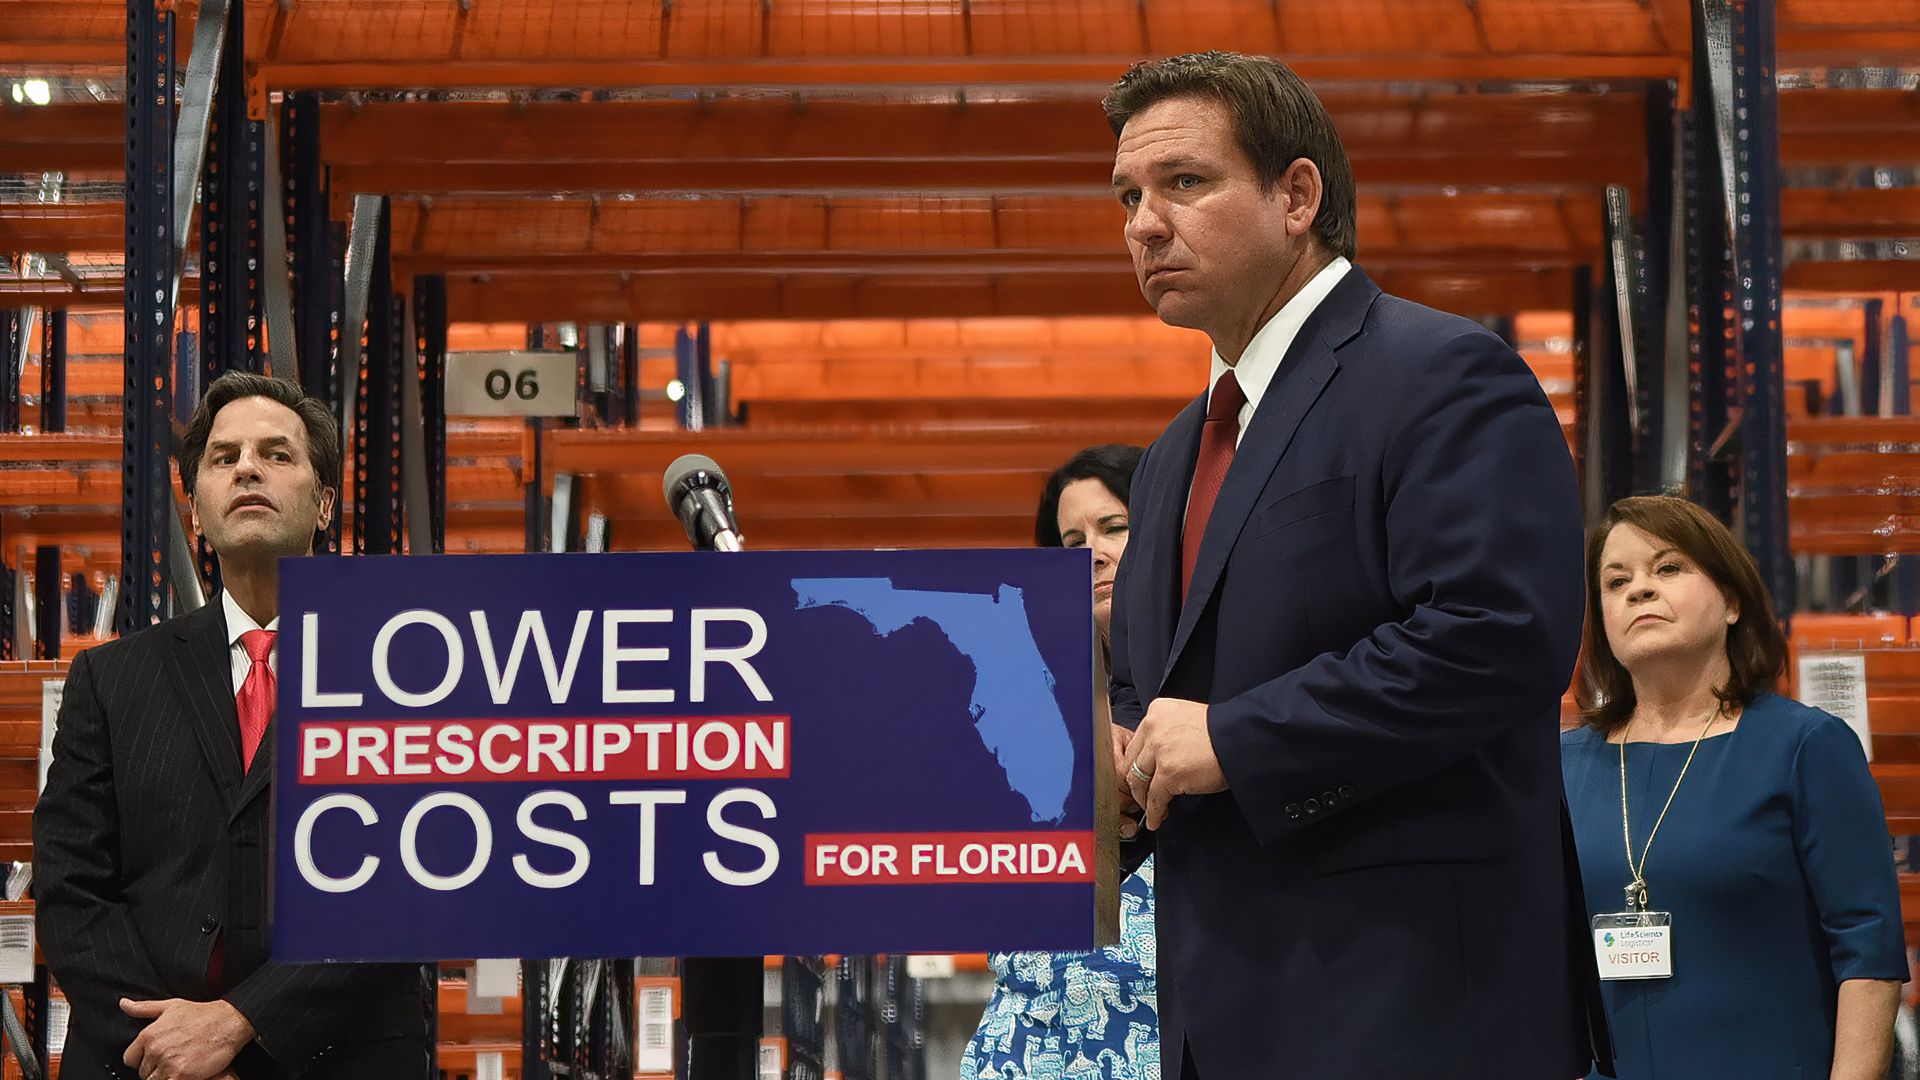 Picture of Ron DeSantis standing next to a sign that says "lower prescription drugs"